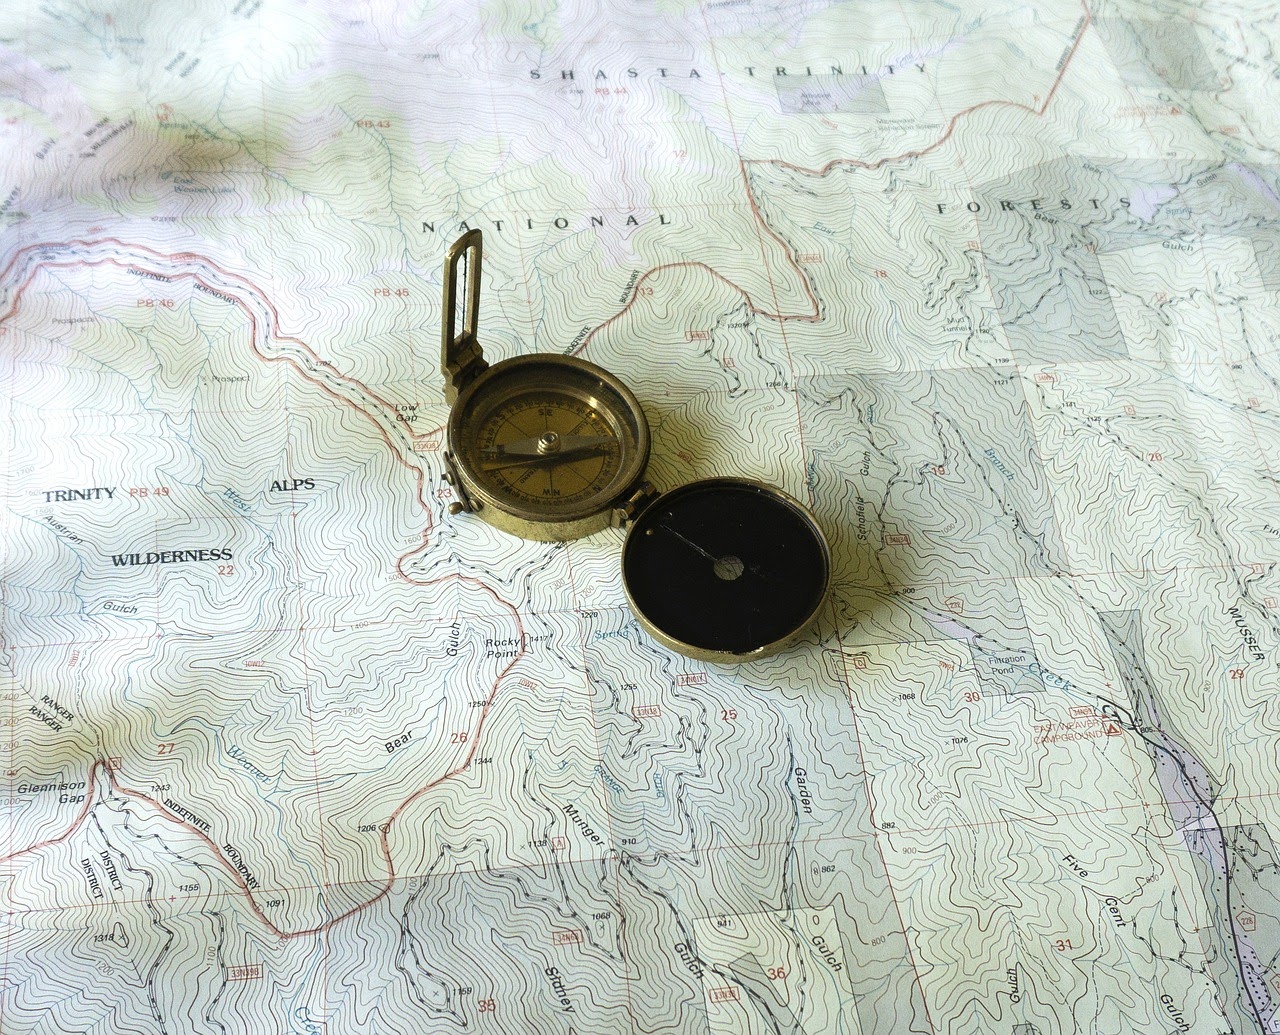 Topo map with compass